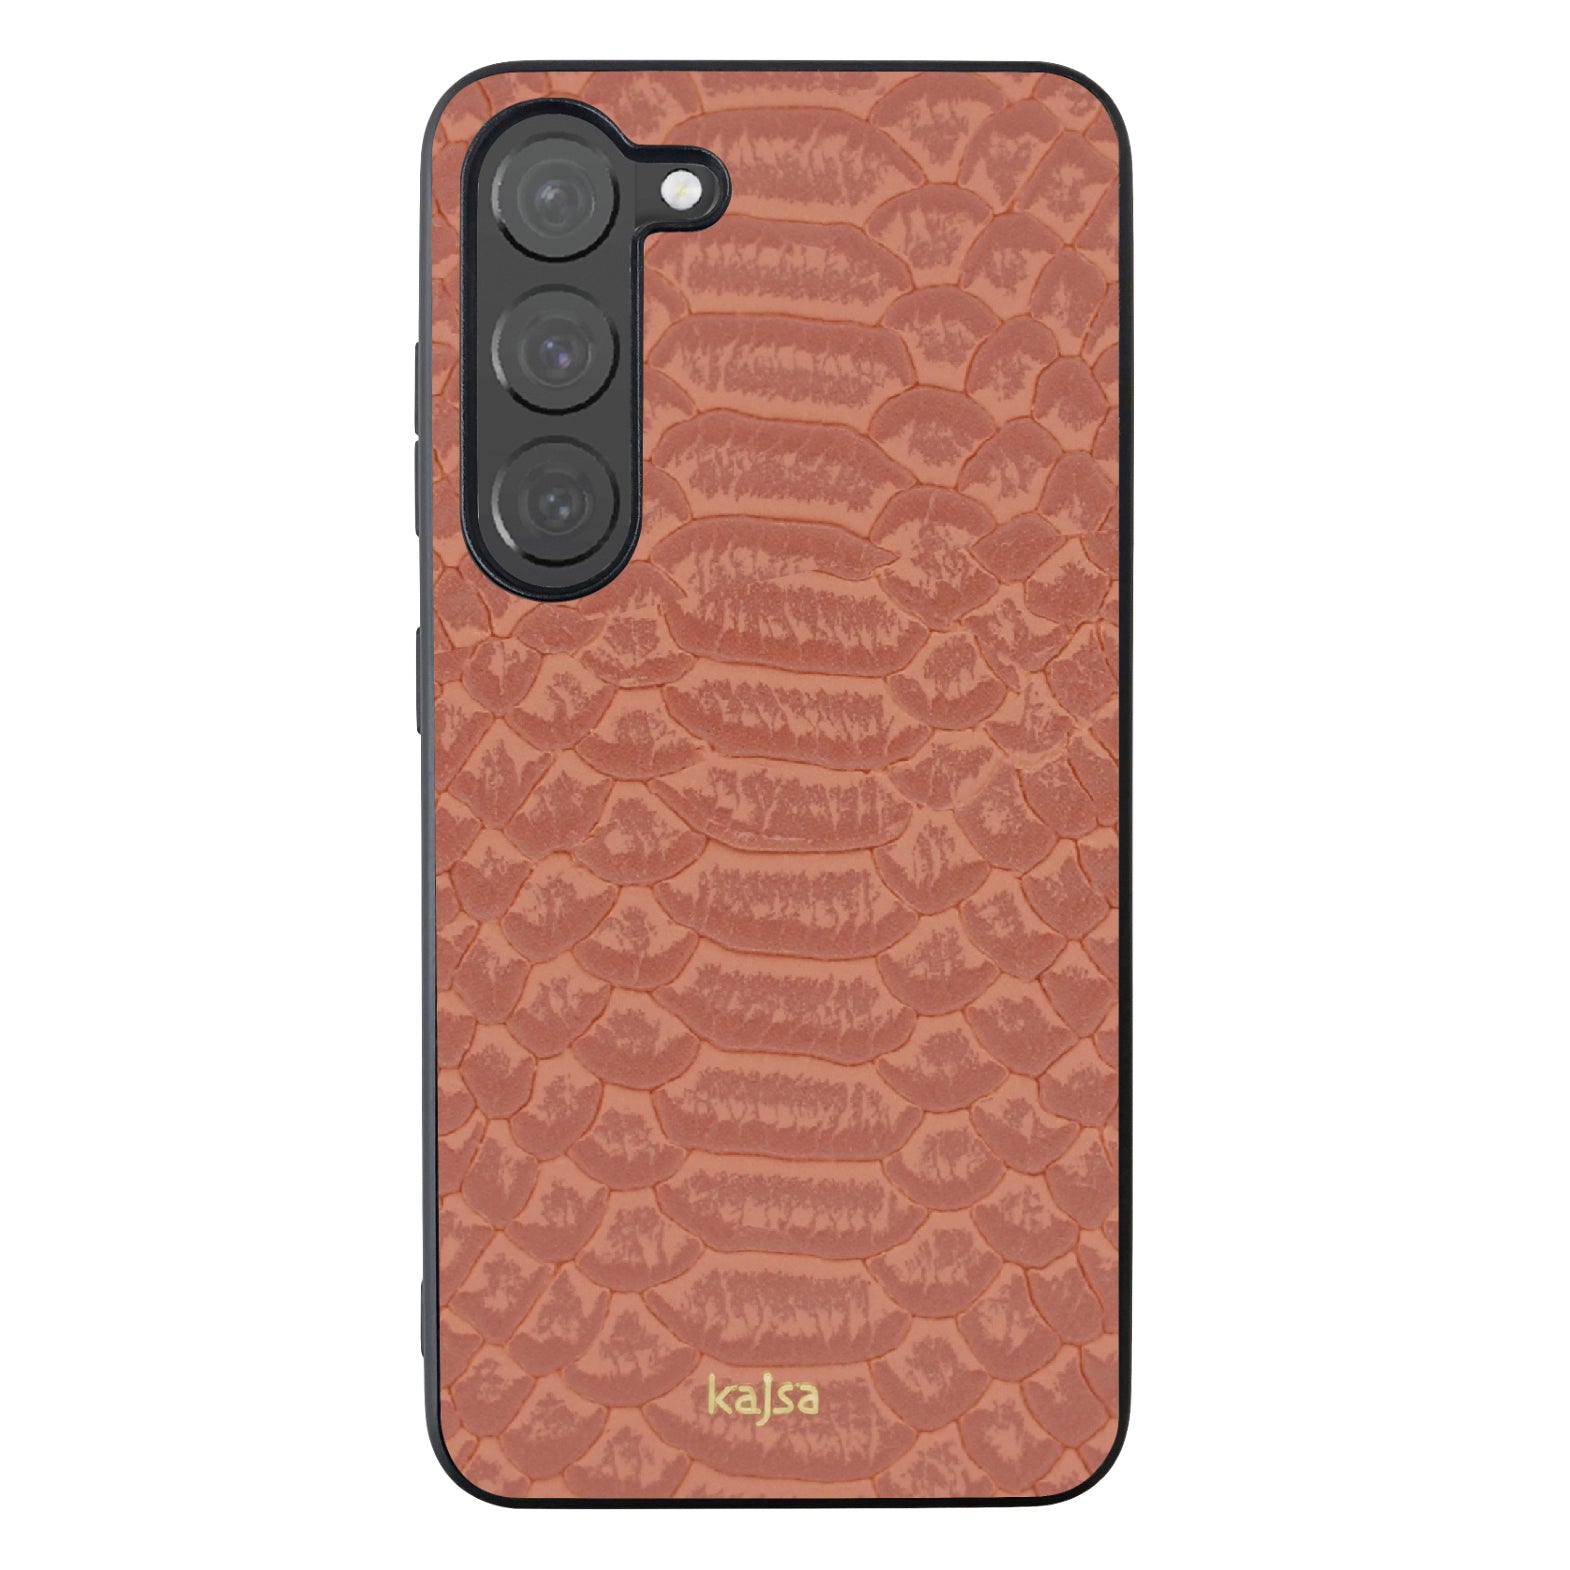 Glamorous Collection - Snake Pattern Back Case for Samsung Galaxy S23/S23+/S23 Ultra-Phone Case- phone case - phone cases- phone cover- iphone cover- iphone case- iphone cases- leather case- leather cases- DIYCASE - custom case - leather cover - hand strap case - croco pattern case - snake pattern case - carbon fiber phone case - phone case brand - unique phone case - high quality - phone case brand - protective case - buy phone case hong kong - online buy phone case - iphone‎手機殼 - 客製化手機殼 - samsung ‎手機殼 - 香